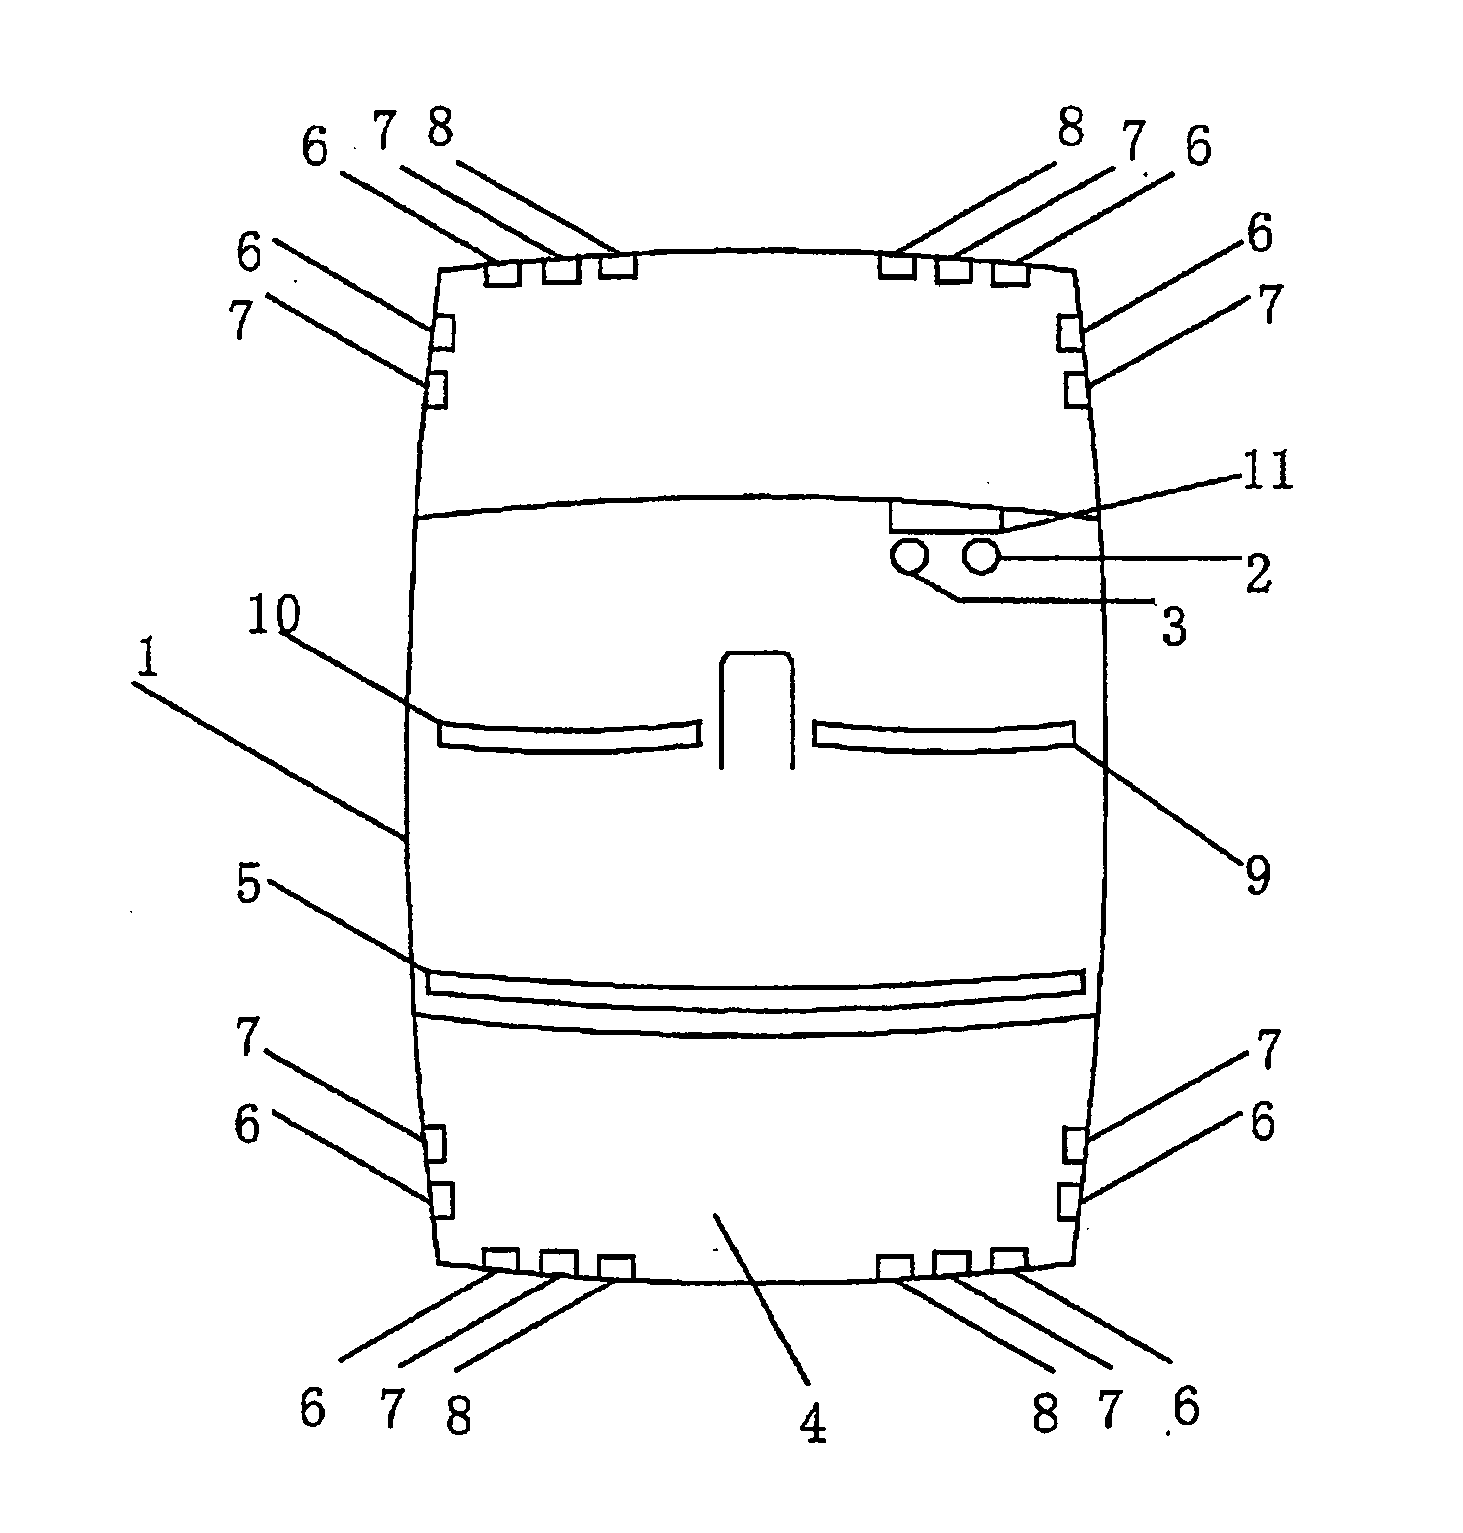 Facilitated safe car steering device